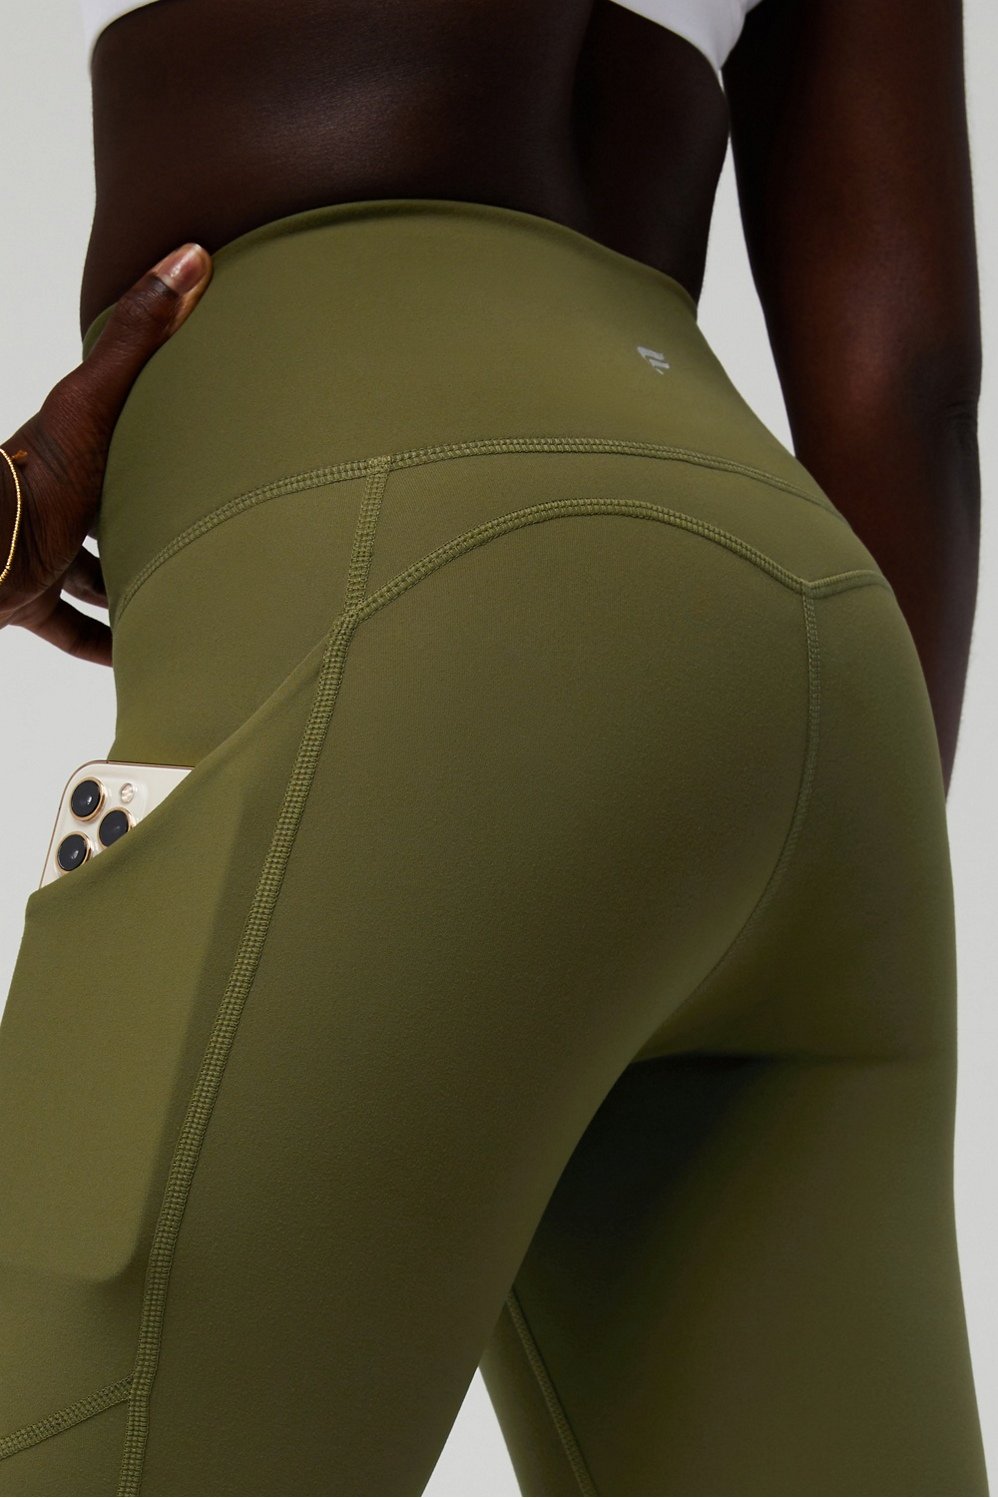 Oasis Pureluxe High-Waisted Pocket Kick Flare - Fabletics Canada